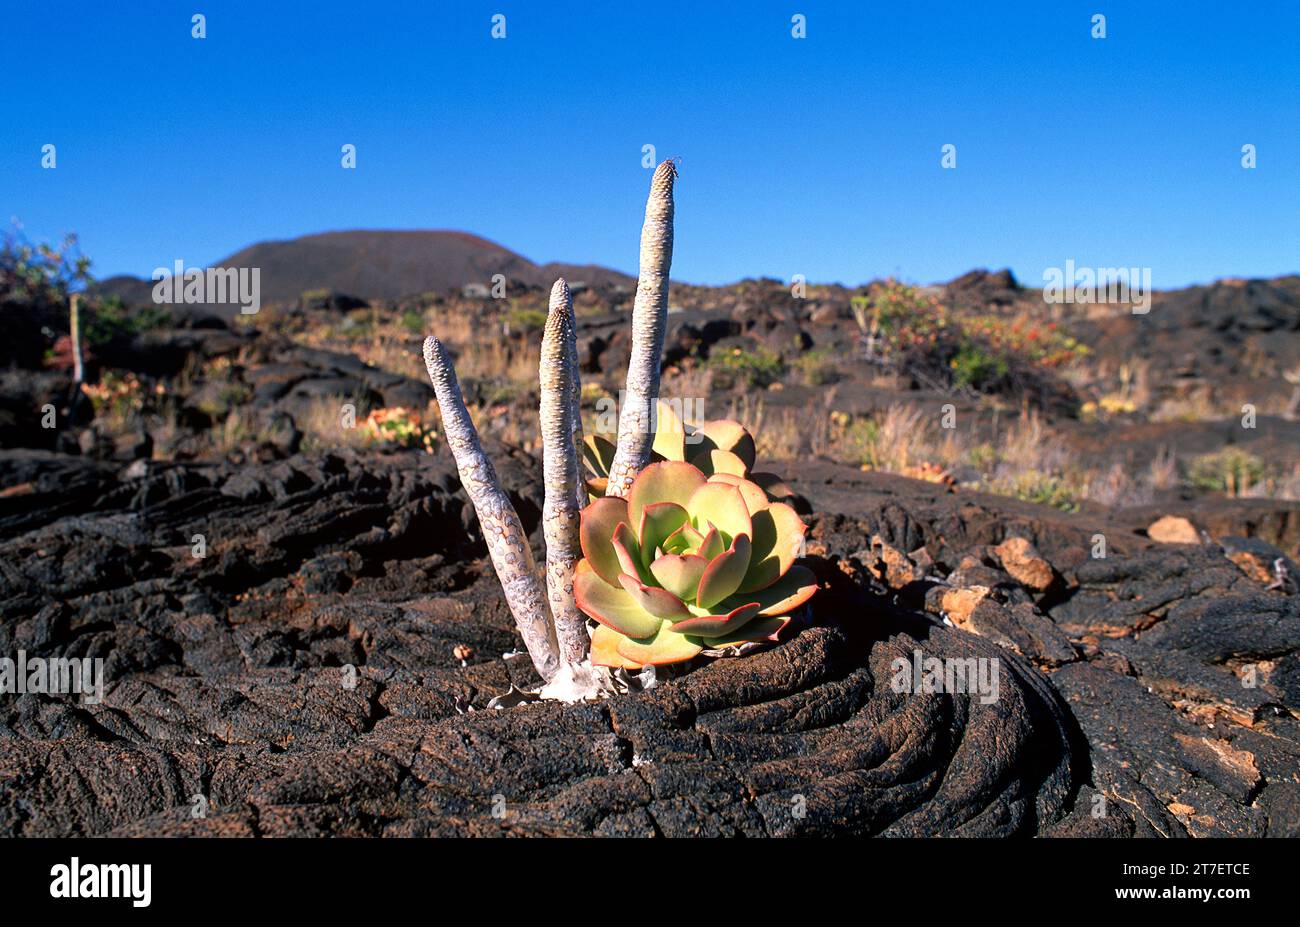 Bejeque de malpais (Aeonium lancerottense) and verode (Kleinia neriifolia) are a succulent shrubs endemic to Canary Islands, Spain. This photo was tak Stock Photo